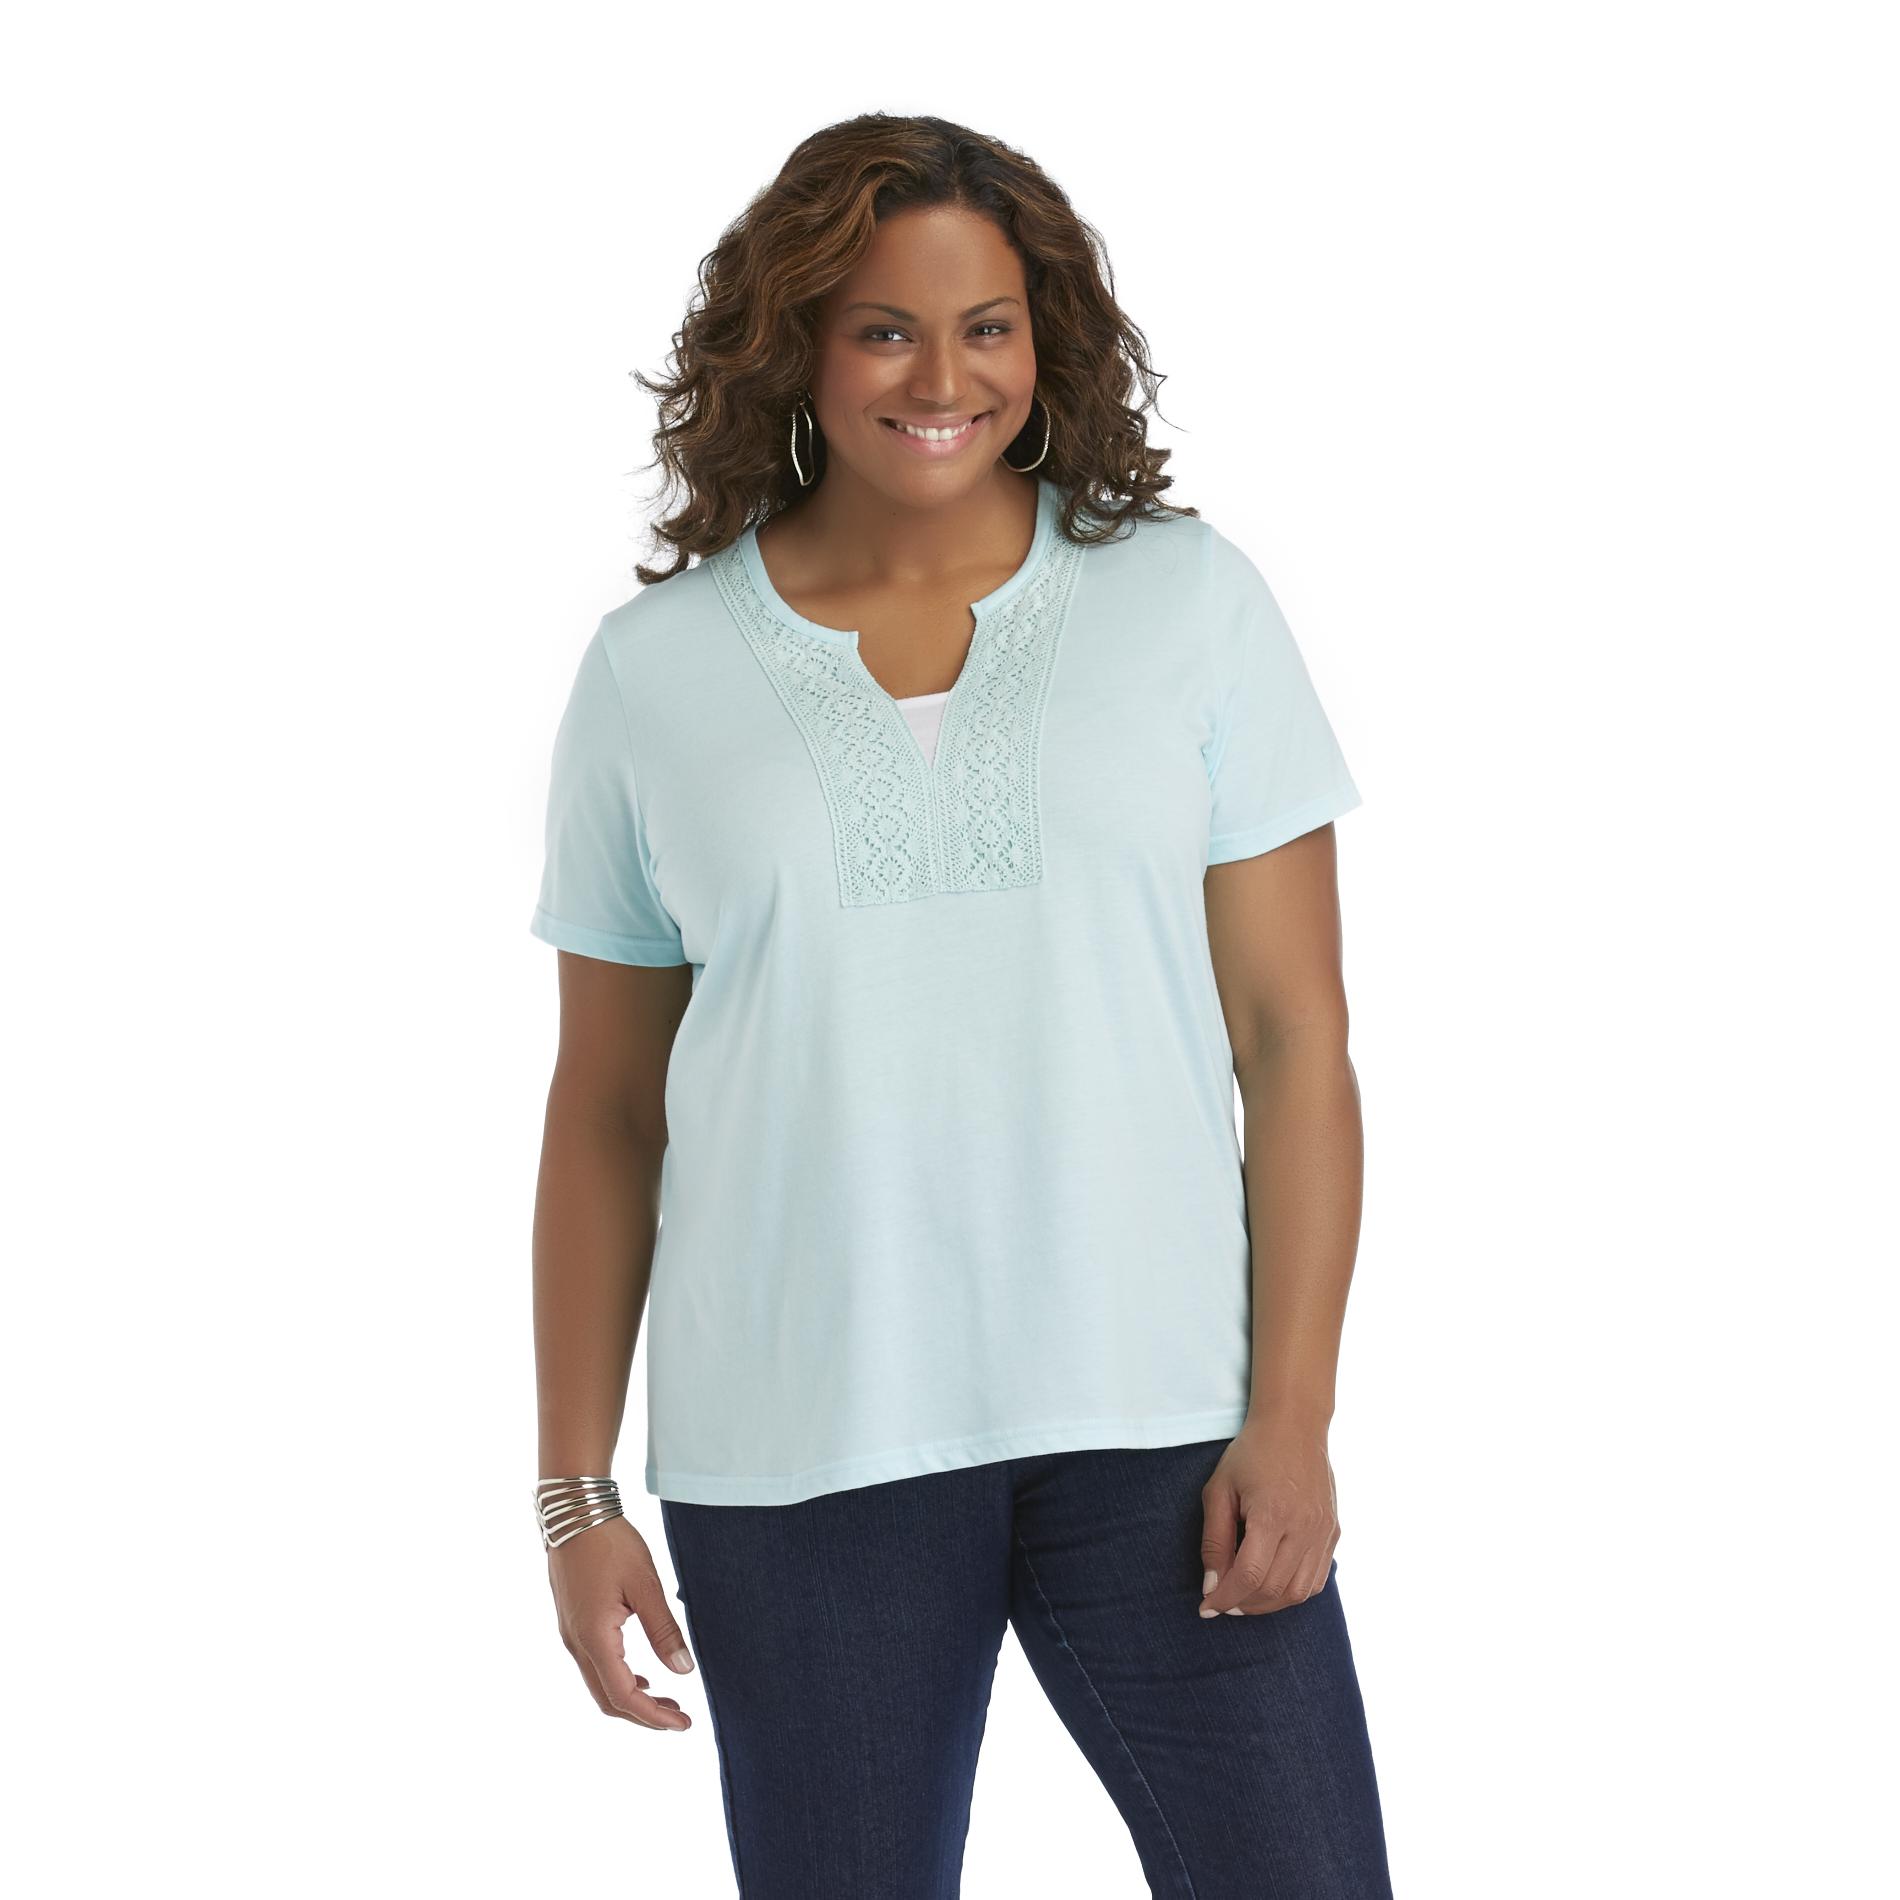 Basic Editions Woman's Plus Embroidered V-Neck T-Shirt